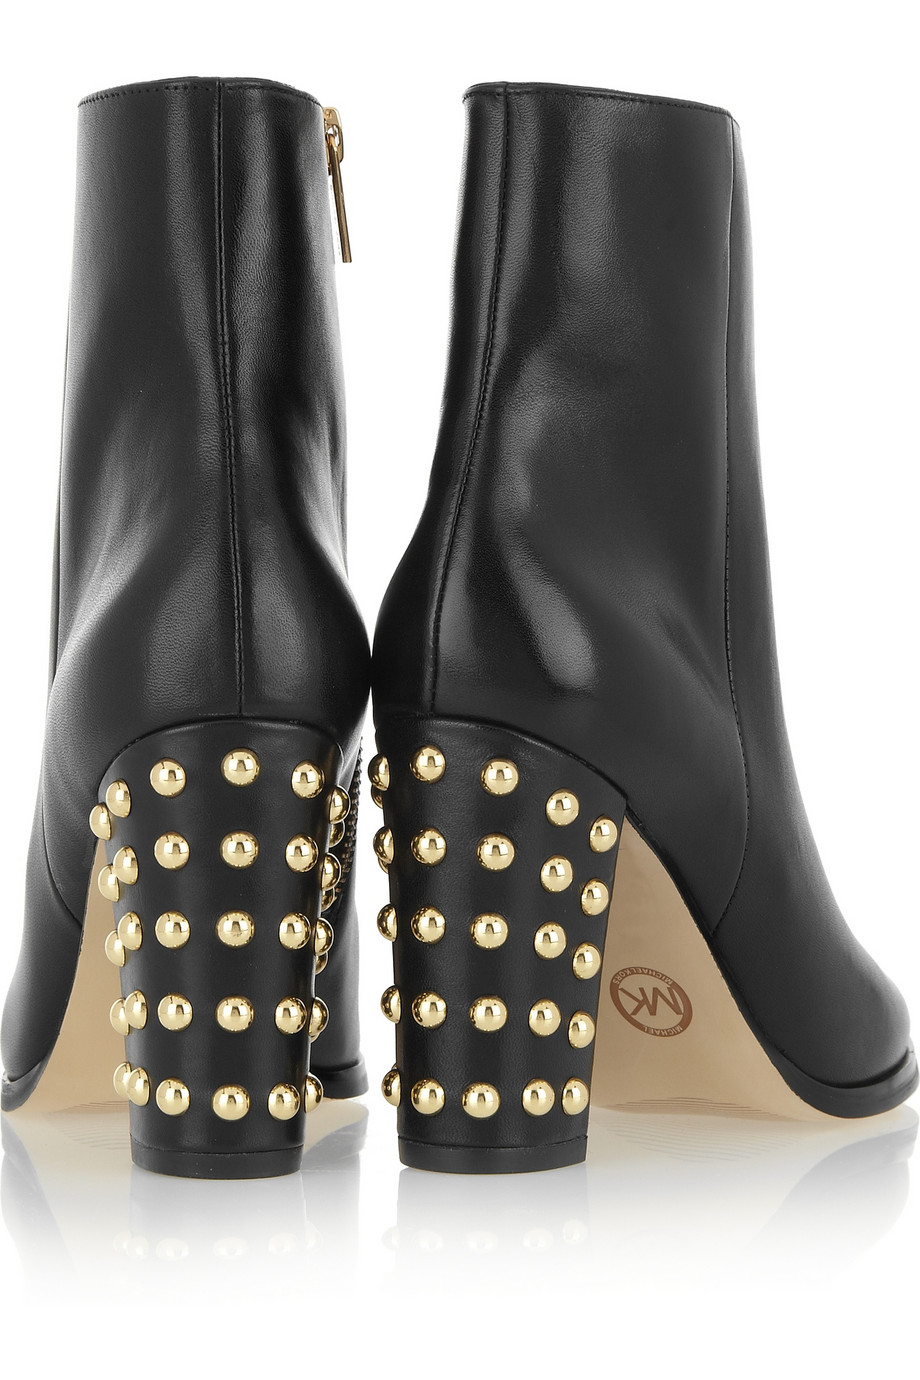 MICHAEL Michael Kors Linden Studded Leather Ankle Boots in Black - Lyst